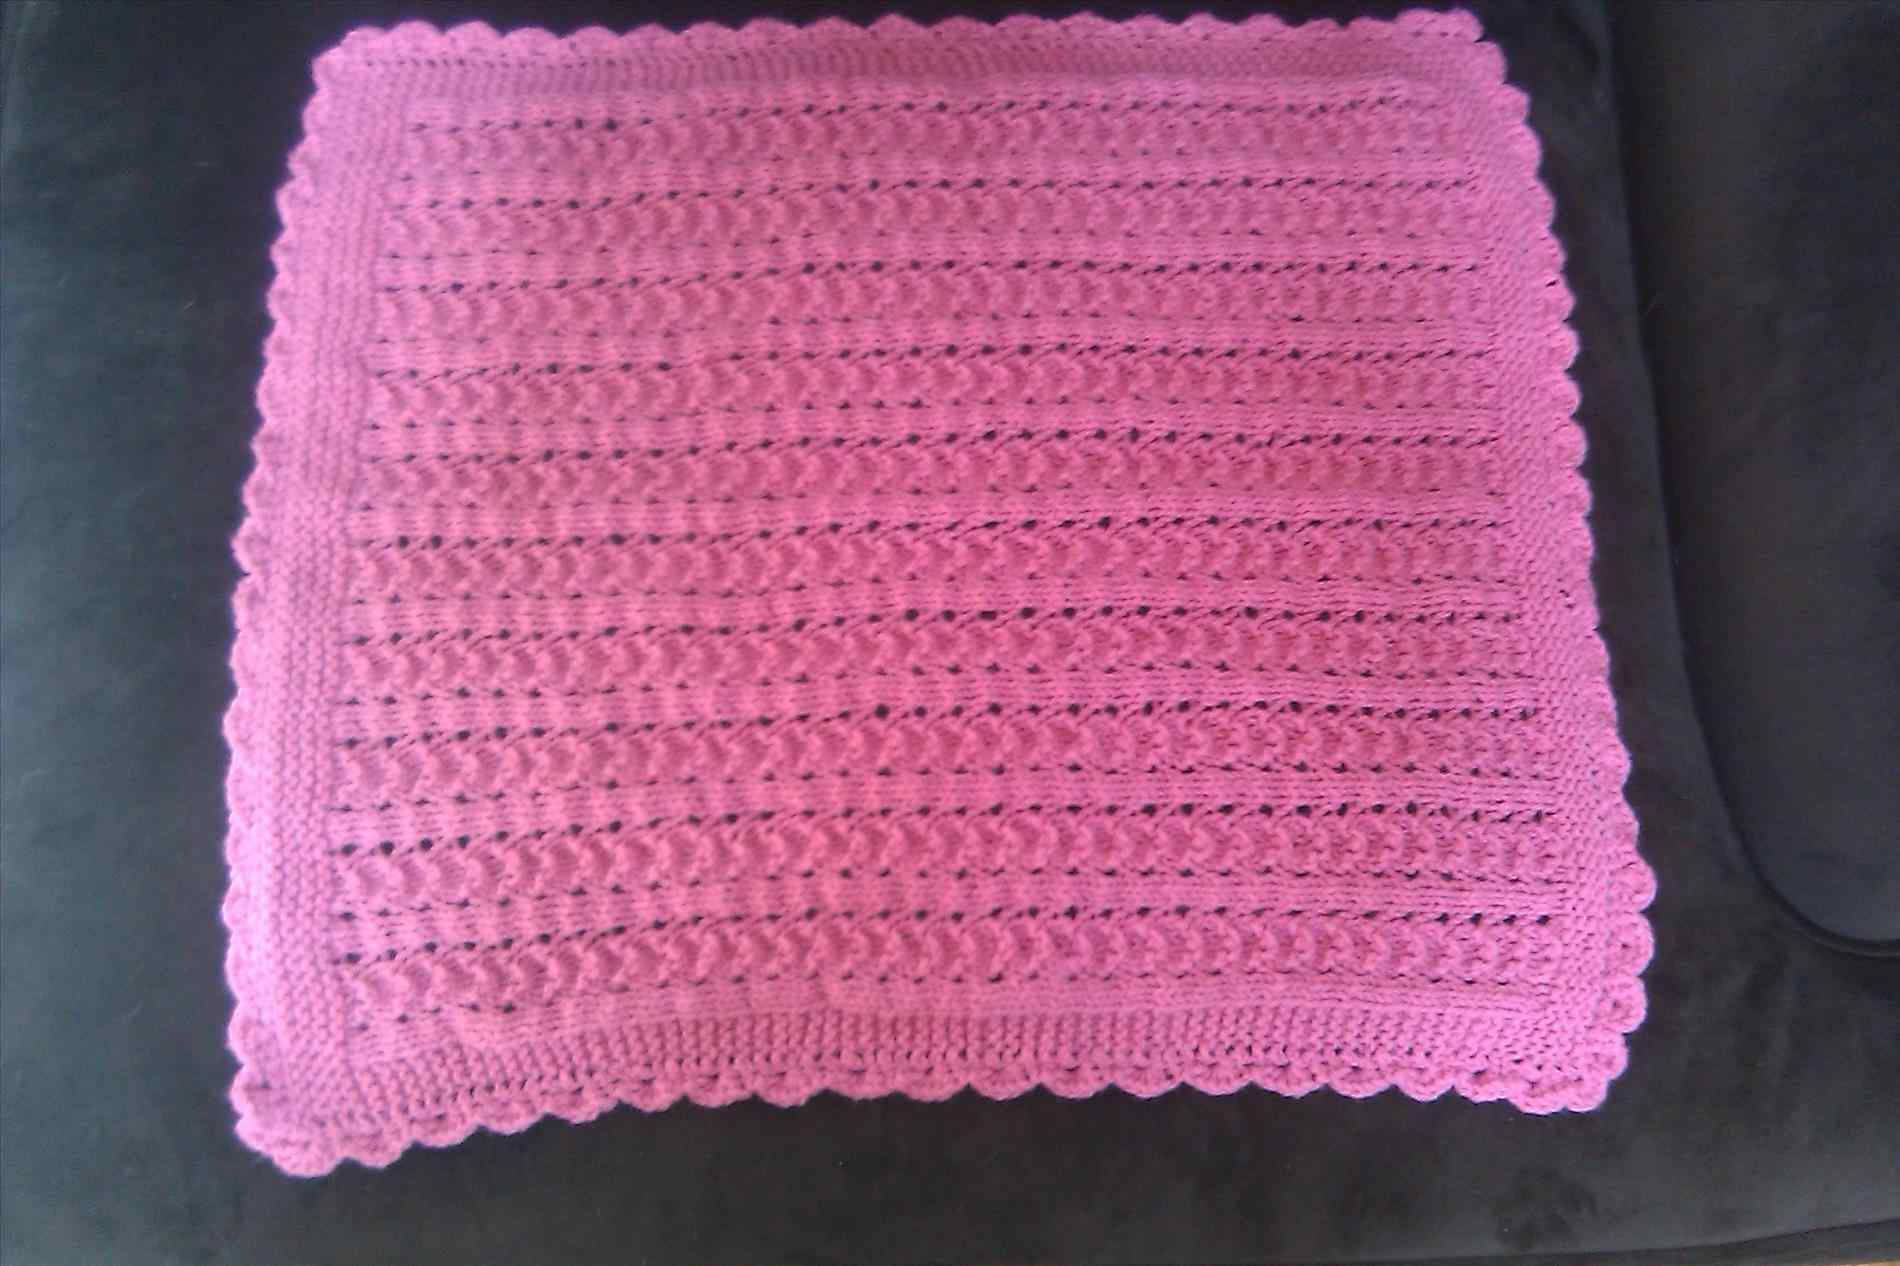 Easy Baby Blanket Crochet Patterns For Beginners Crochet Pattern Afghan Favecraftscomrhfavecraftscom Very For